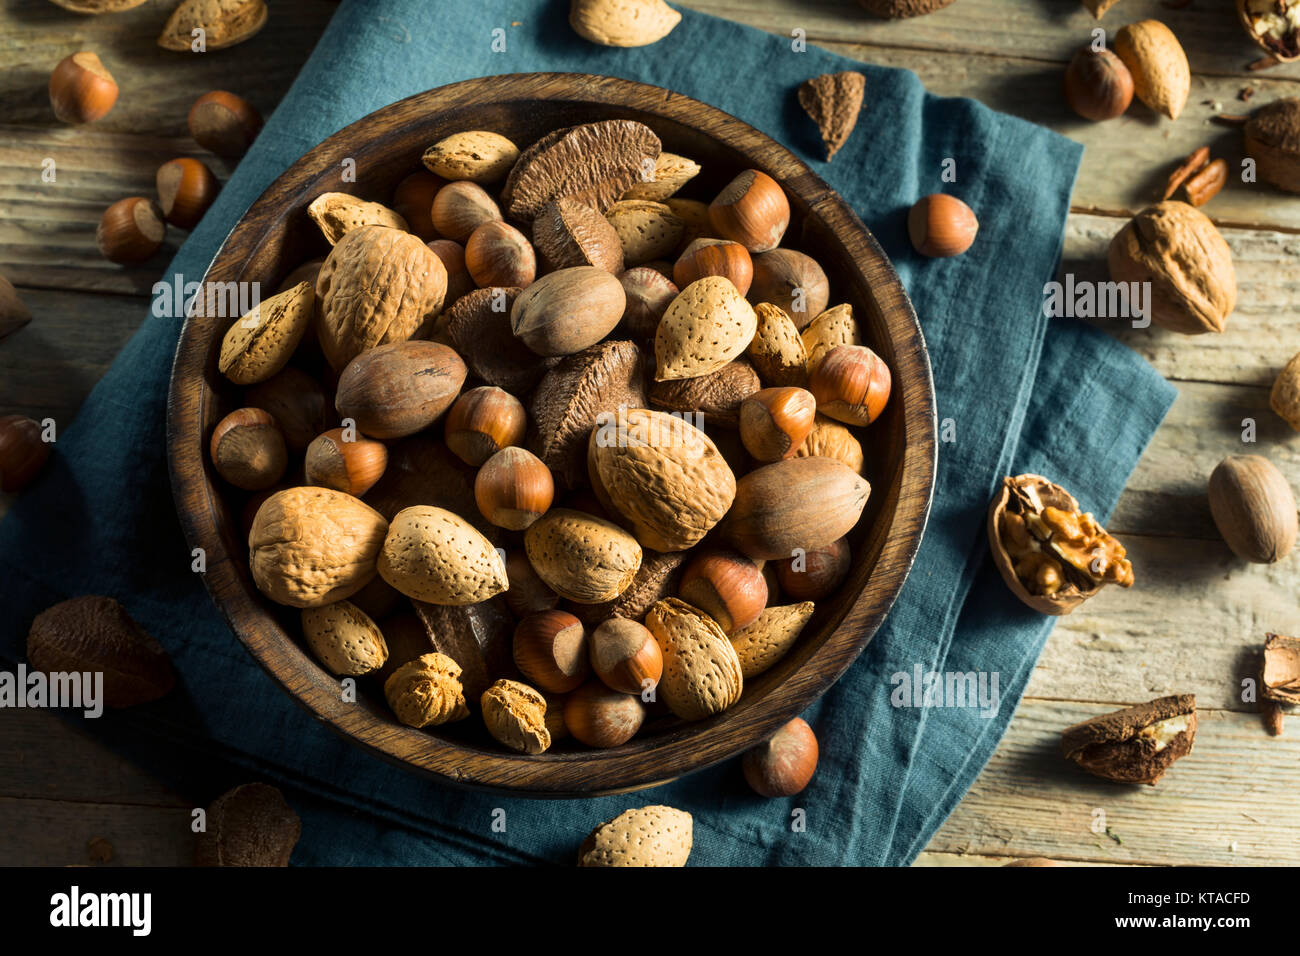 Whole Shelled Organic Mixed Nuts with Walnuts Almonds Pecans and Filberts Stock Photo